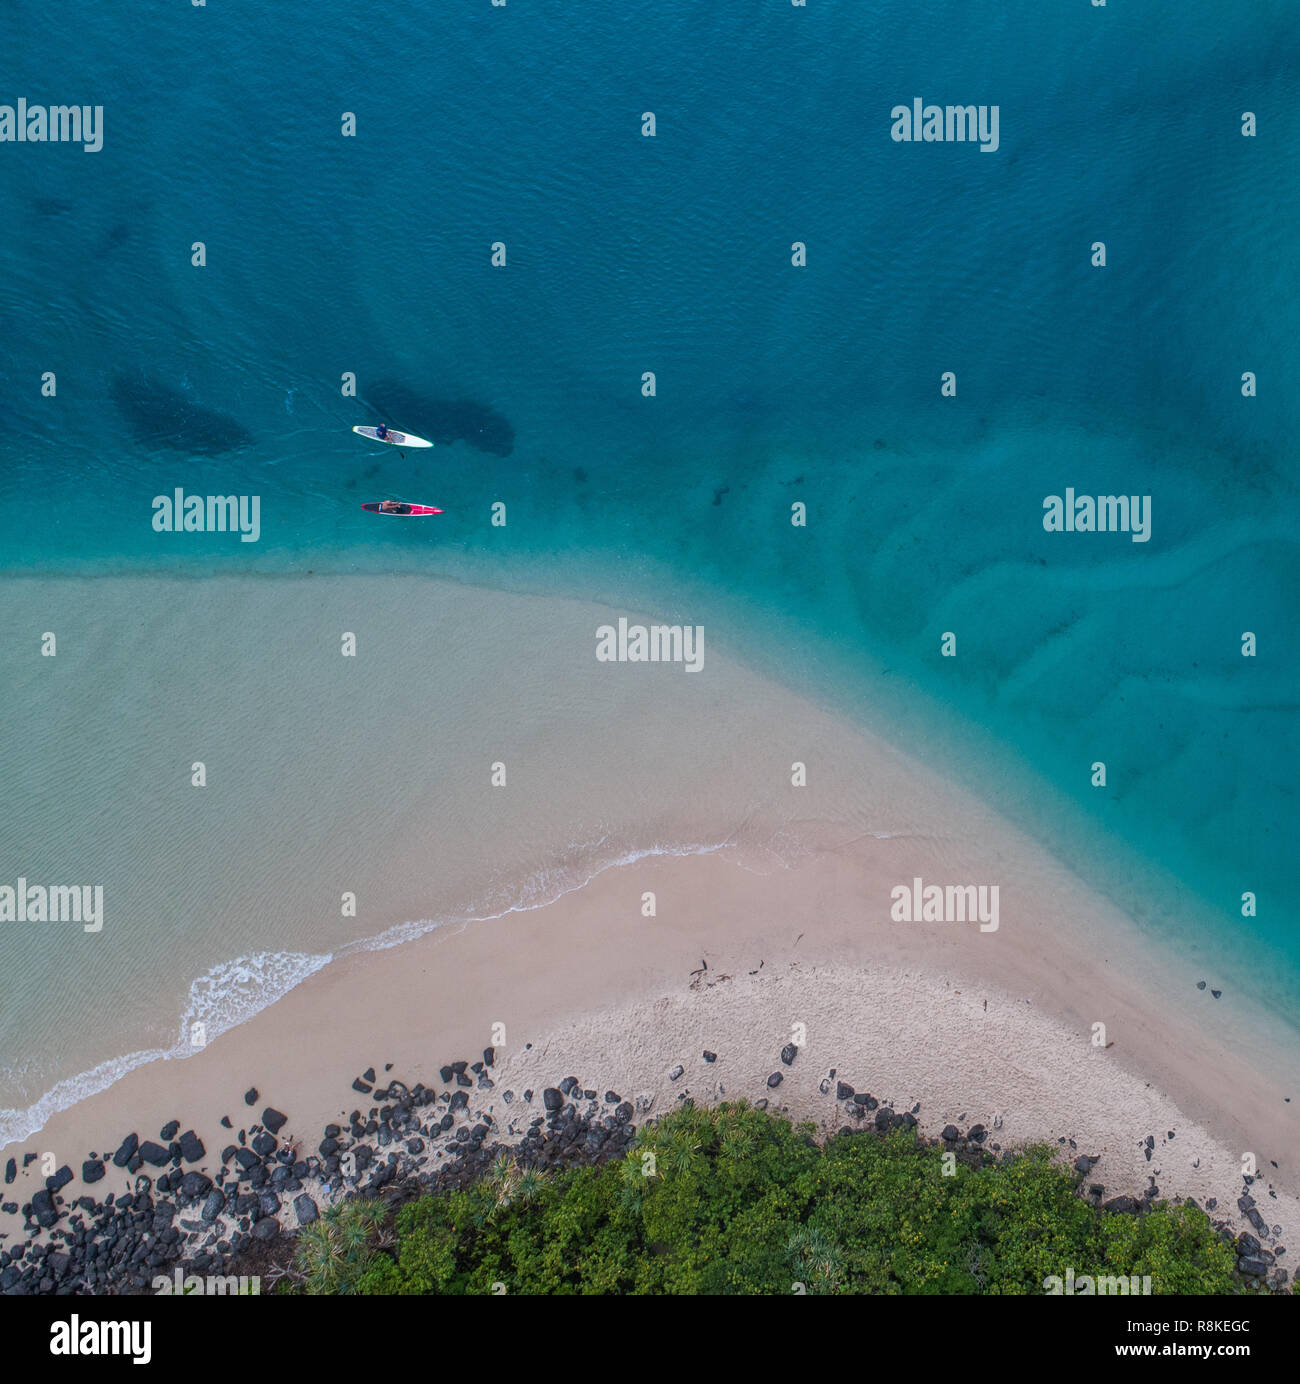 Kayak aerial in the blue creek. Beautiful drone shot of a man kayaking in shallow water perfect for fishing, sport and fitness active. Stock Photo